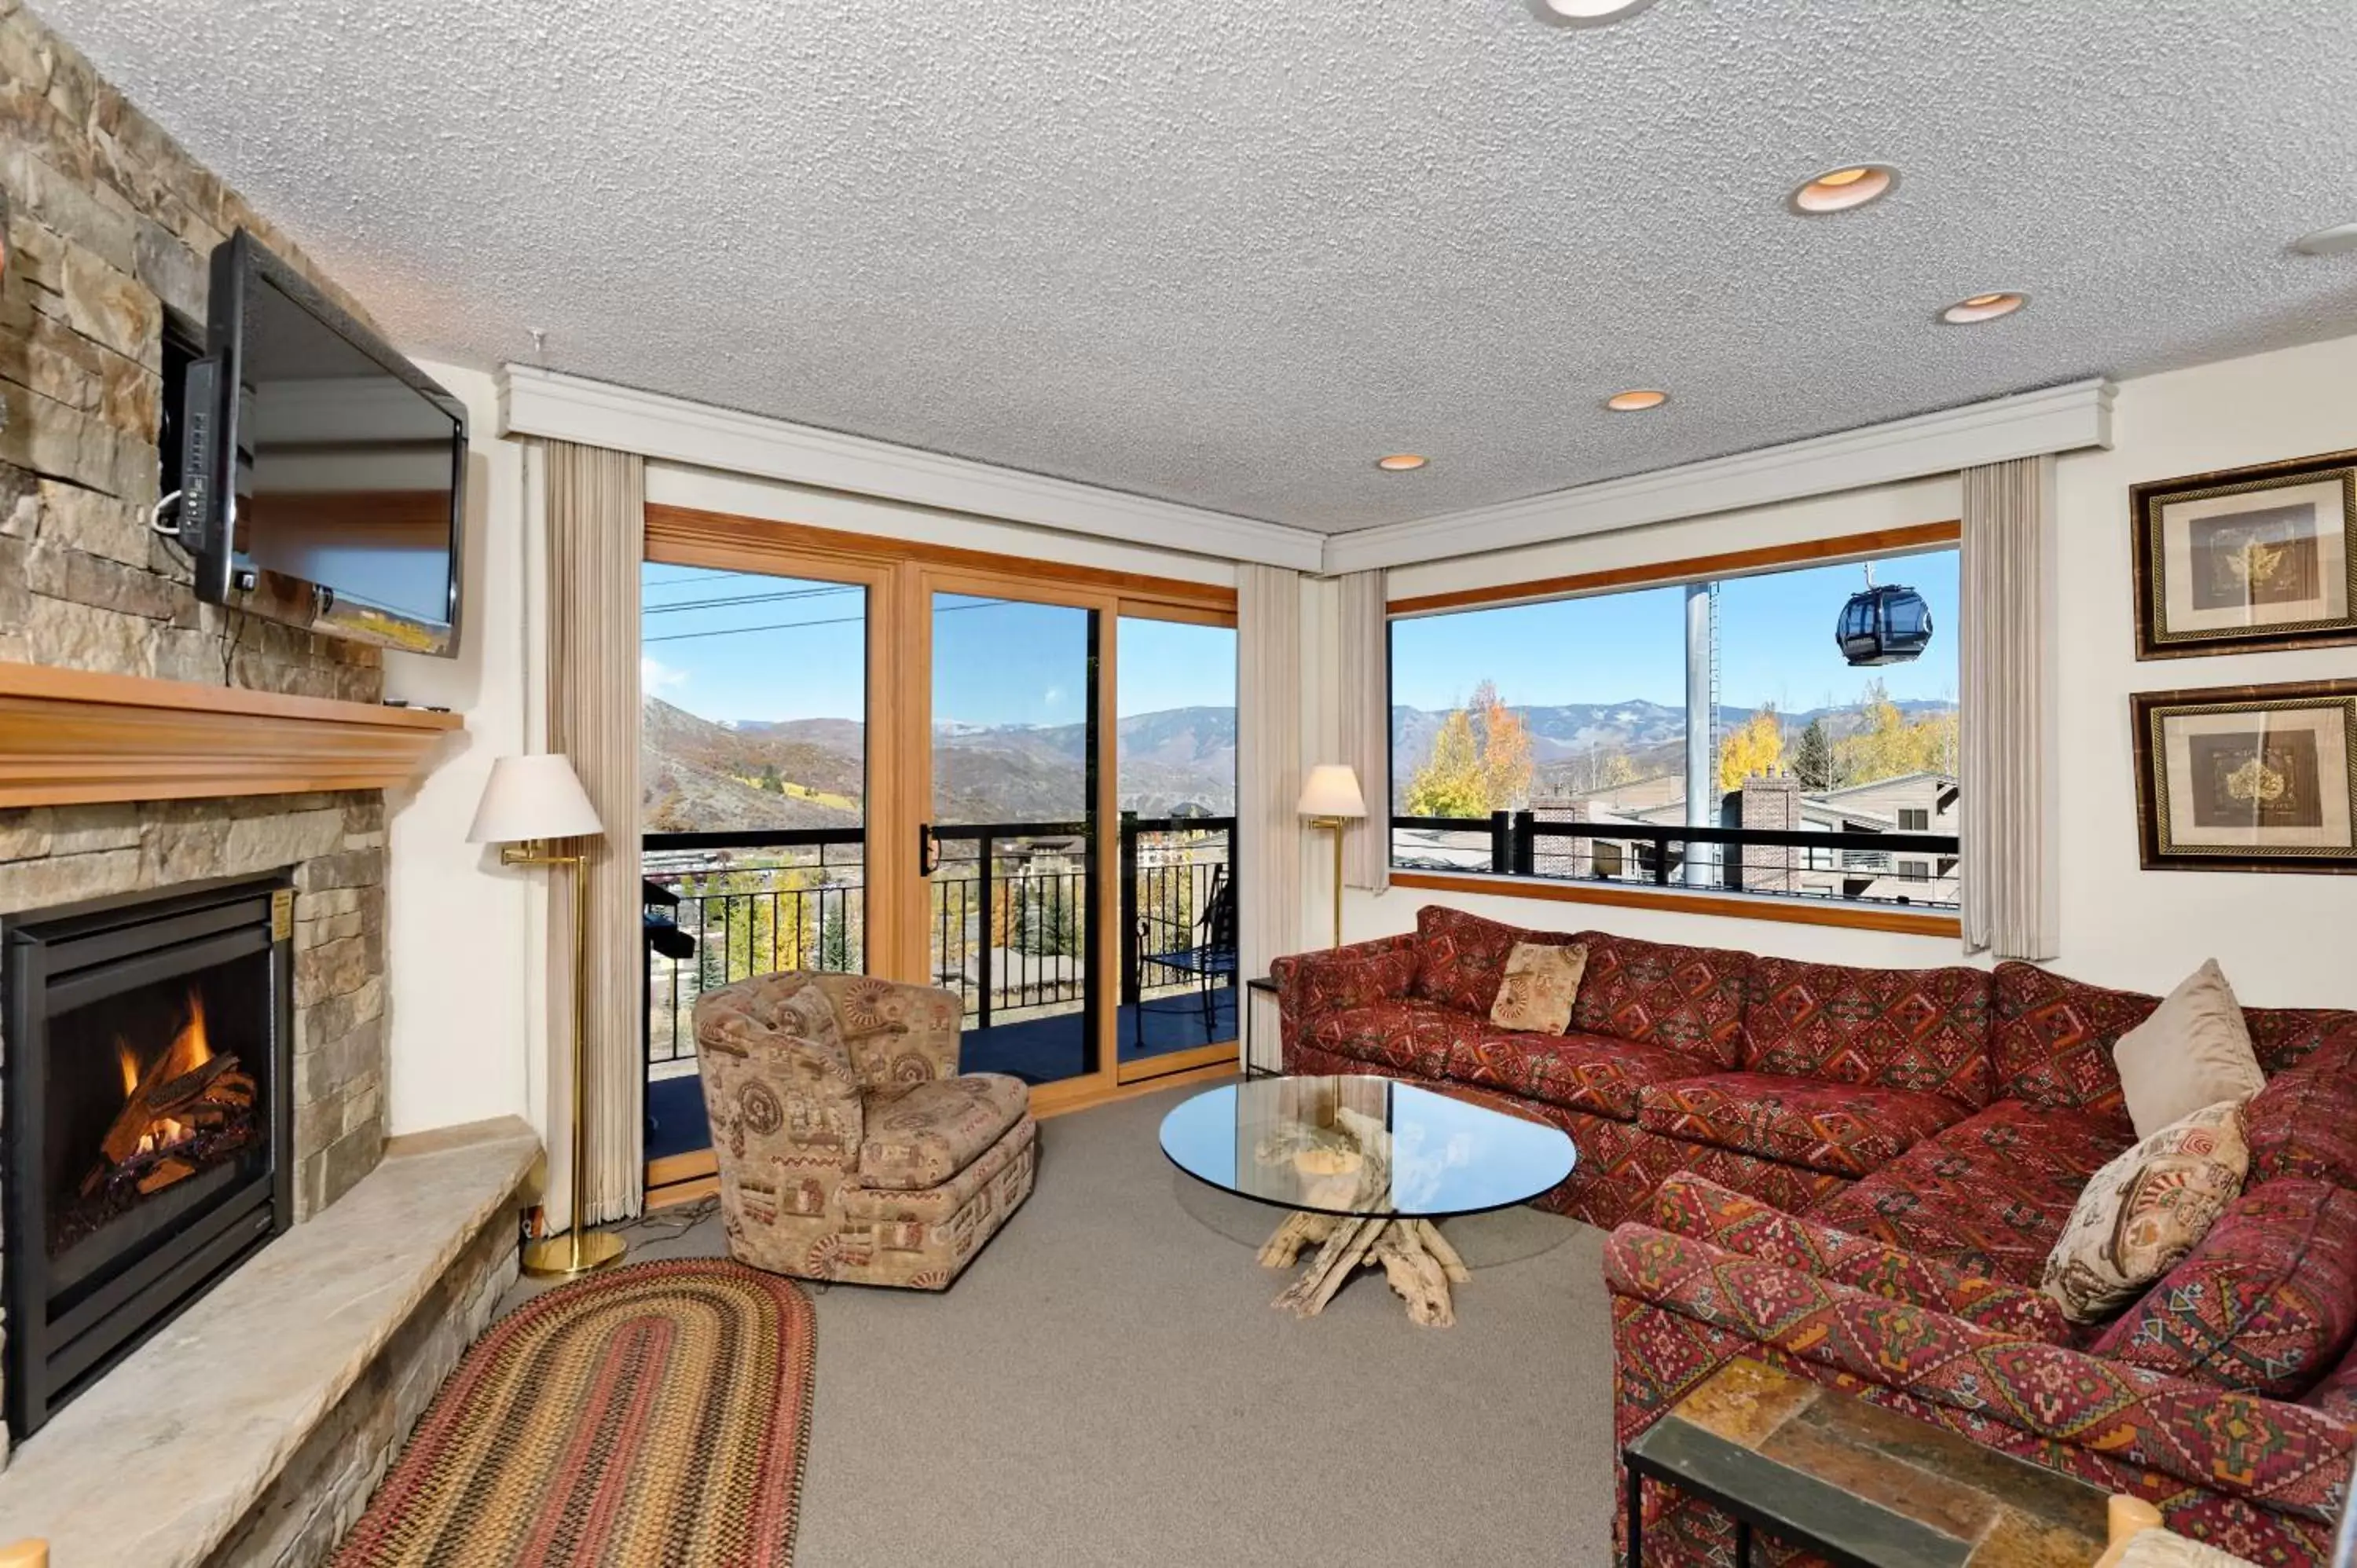 Deluxe Two-Bedroom Apartment in The Crestwood Snowmass Village